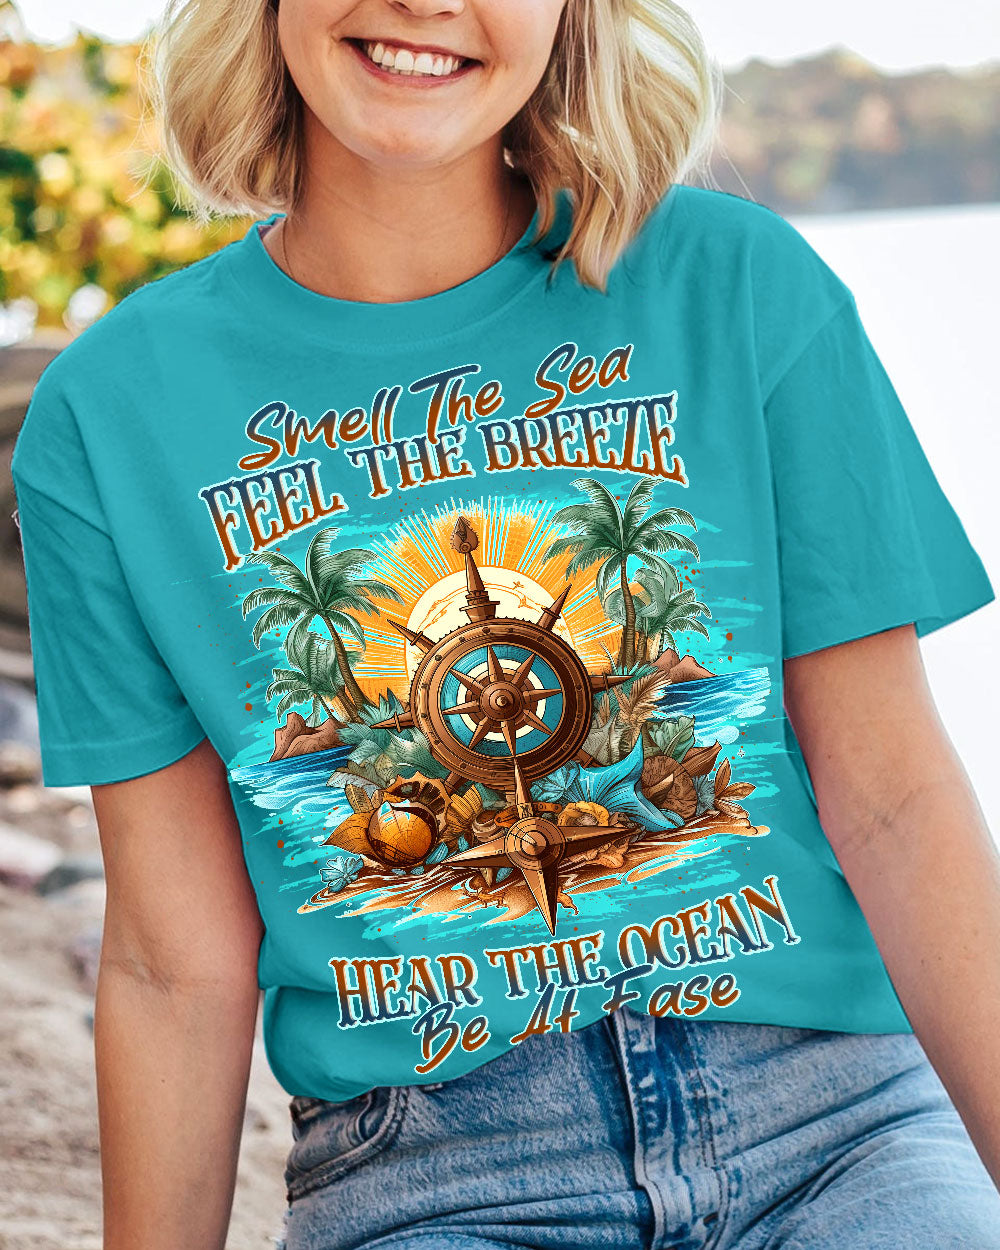 SMELL THE SEA FEEL THE BREEZE COTTON SHIRT - YHLN0906238